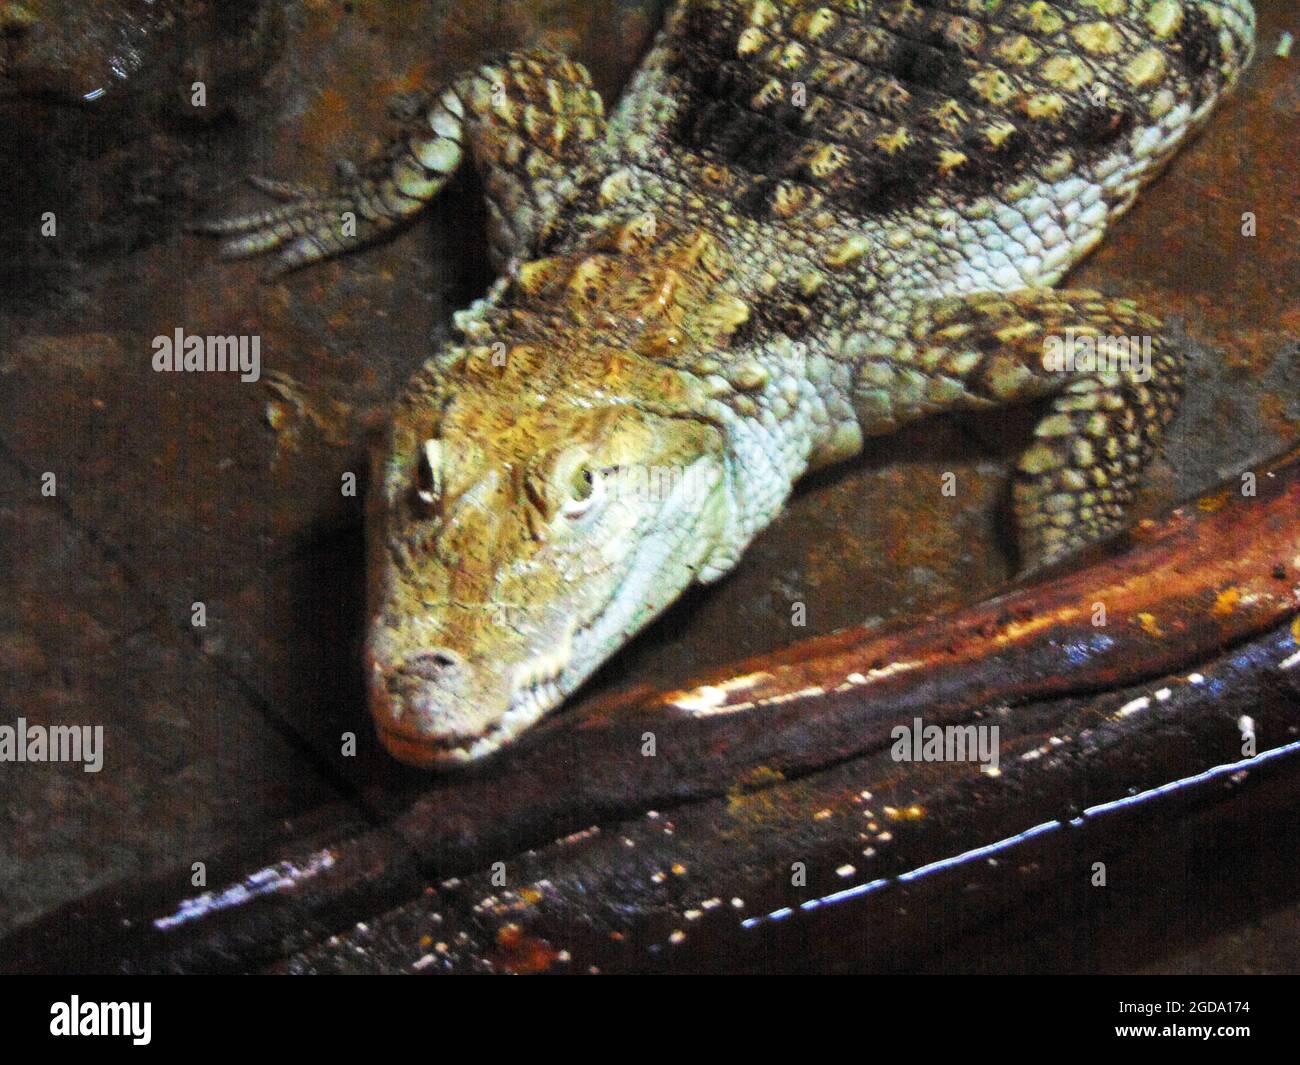 Nile Crocodile In Zoo High Resolution Stock Photography and Images - Alamy